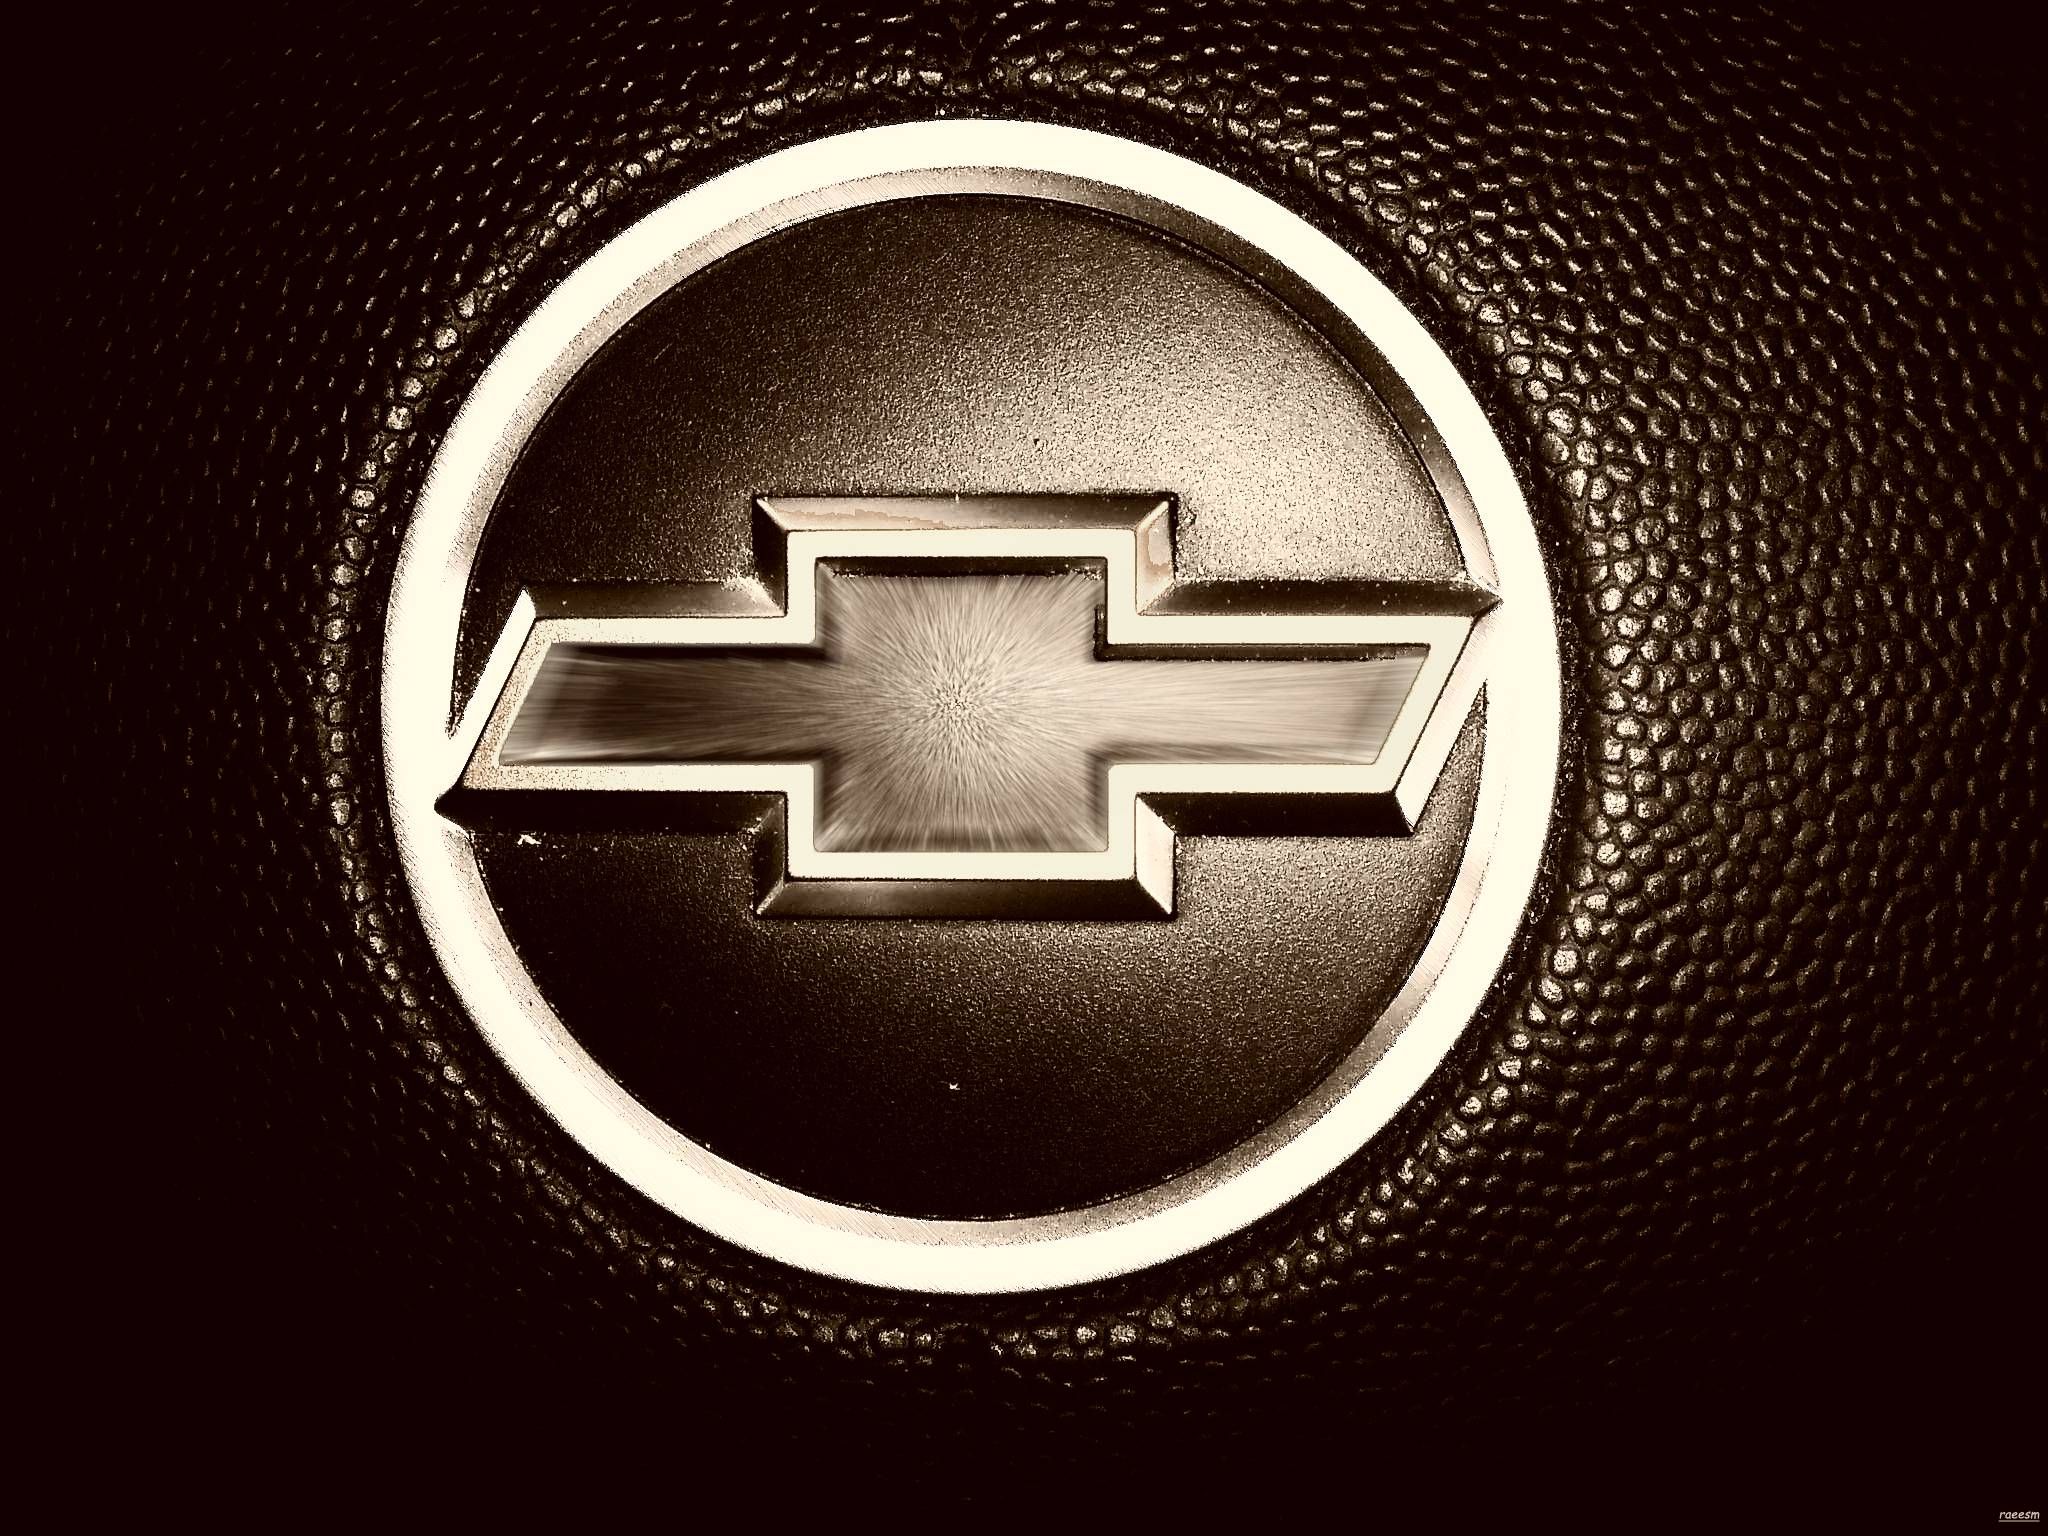 Chevy Emblem Wallpapers   Chevy Life Logos